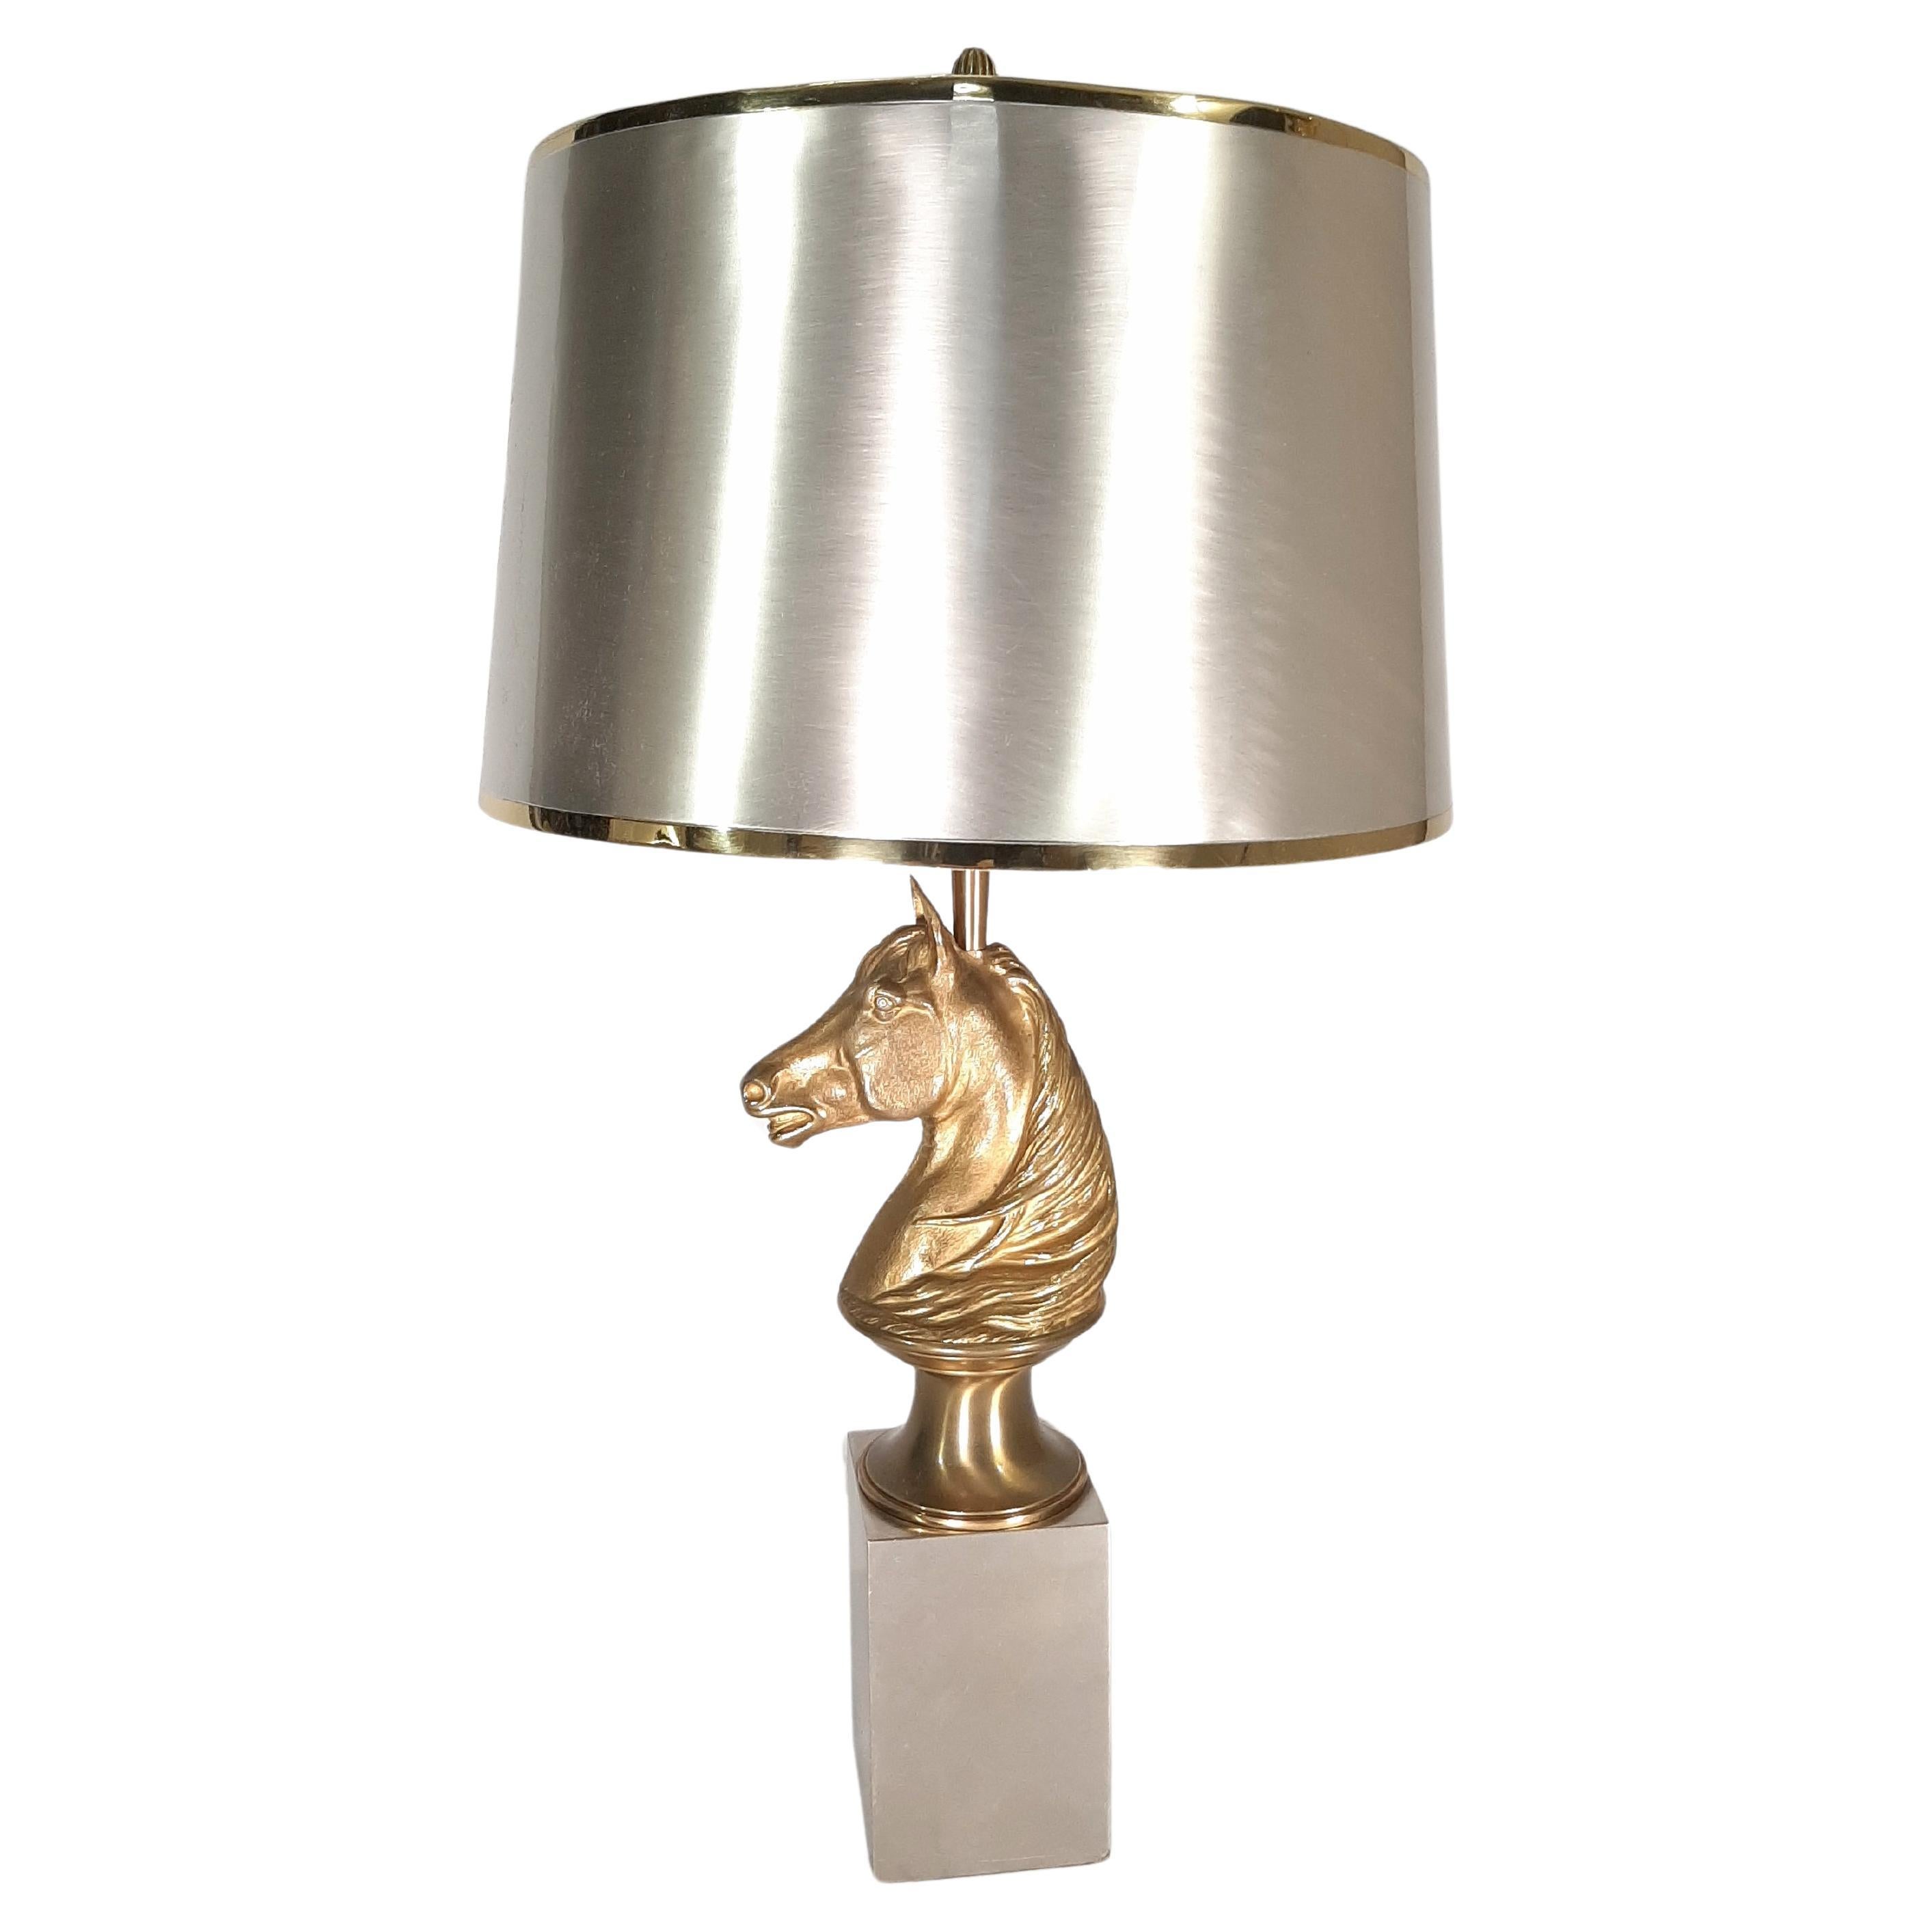 Rare Horse Table lamp by Maison Charles in original conditions, stamped on the base 